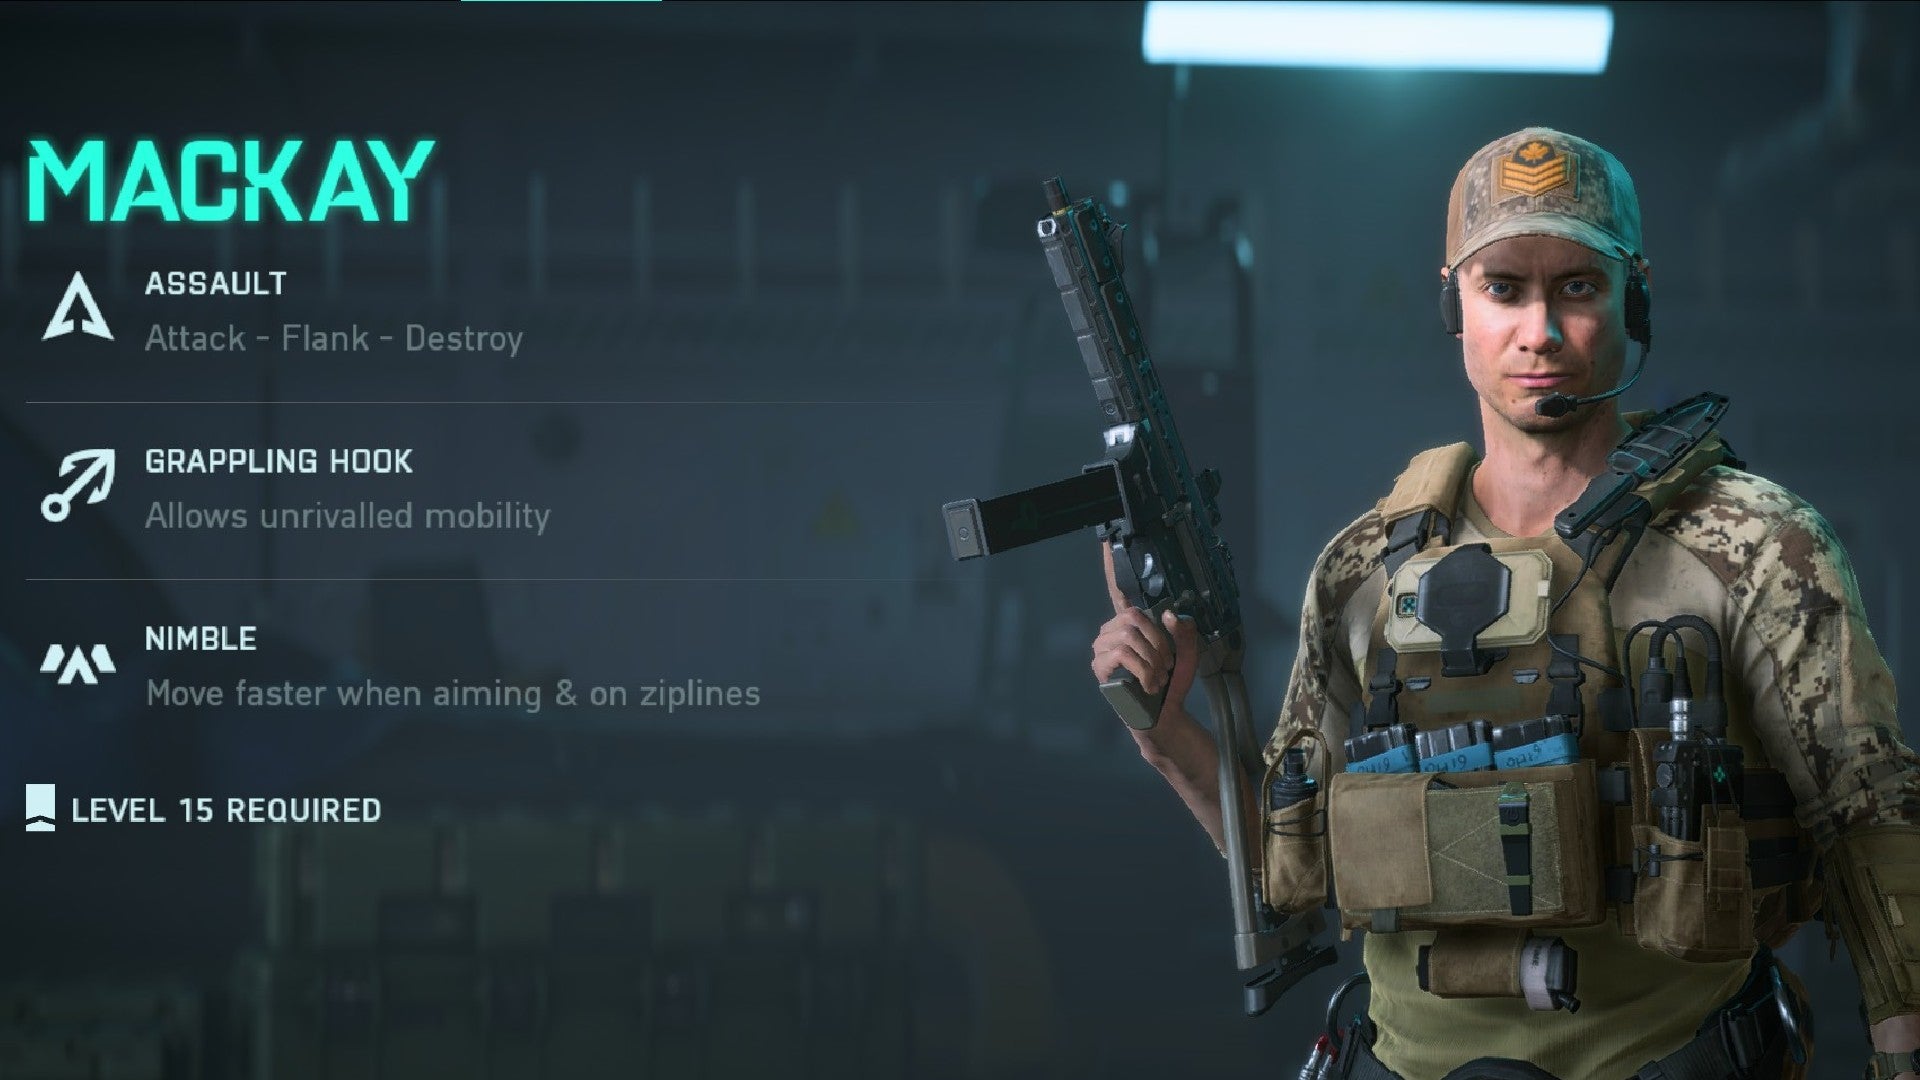 Mackay stood holding an SMG in the specialist selection menu. Text on the left describes his abilities.